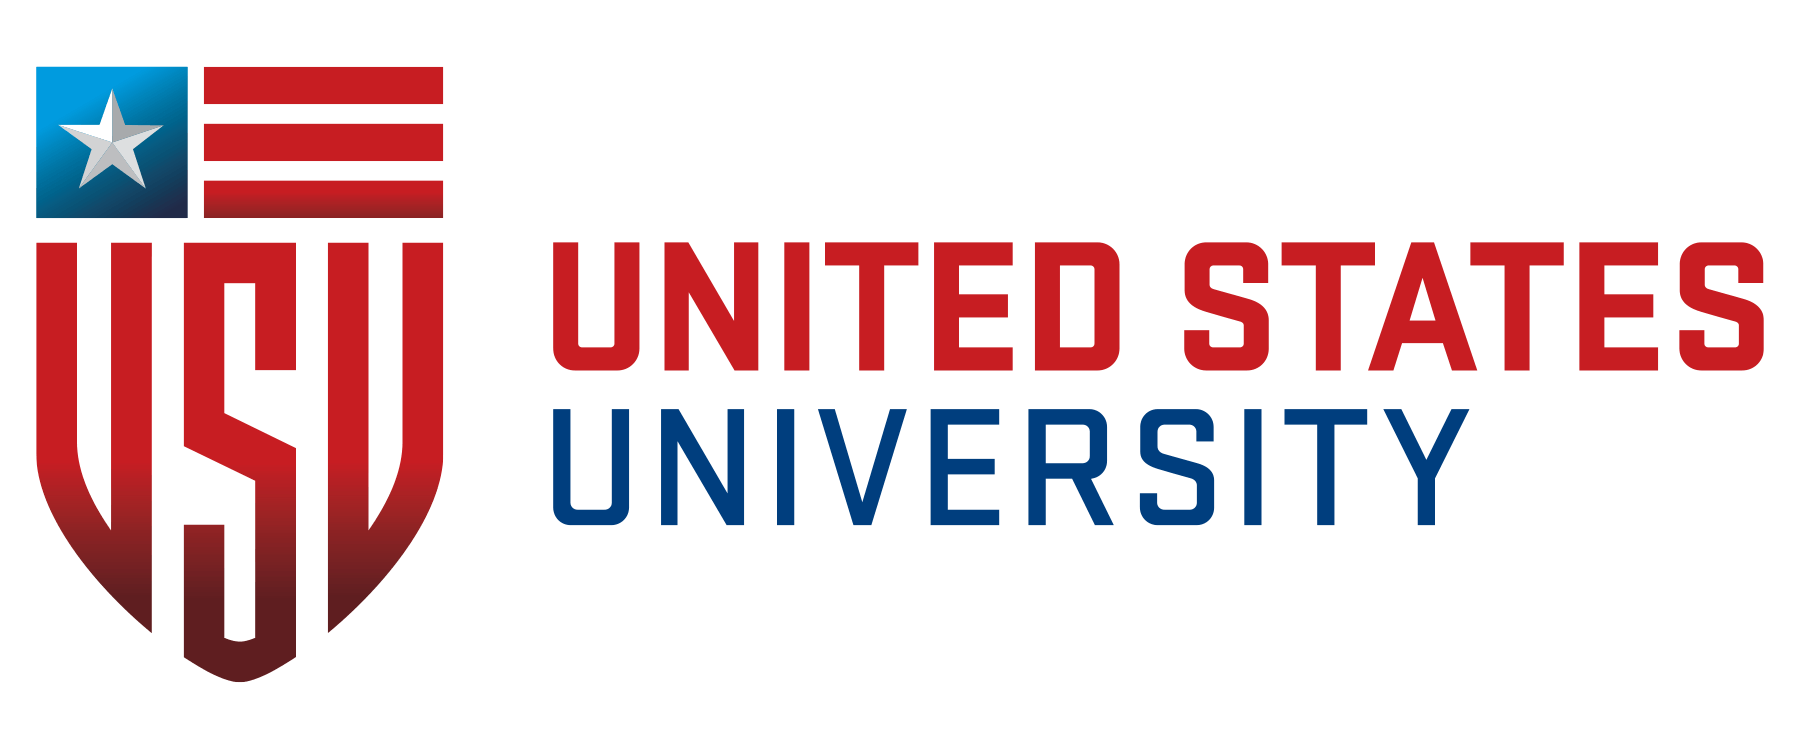 United States Logo - Announcing Our New Logo and Branding States University